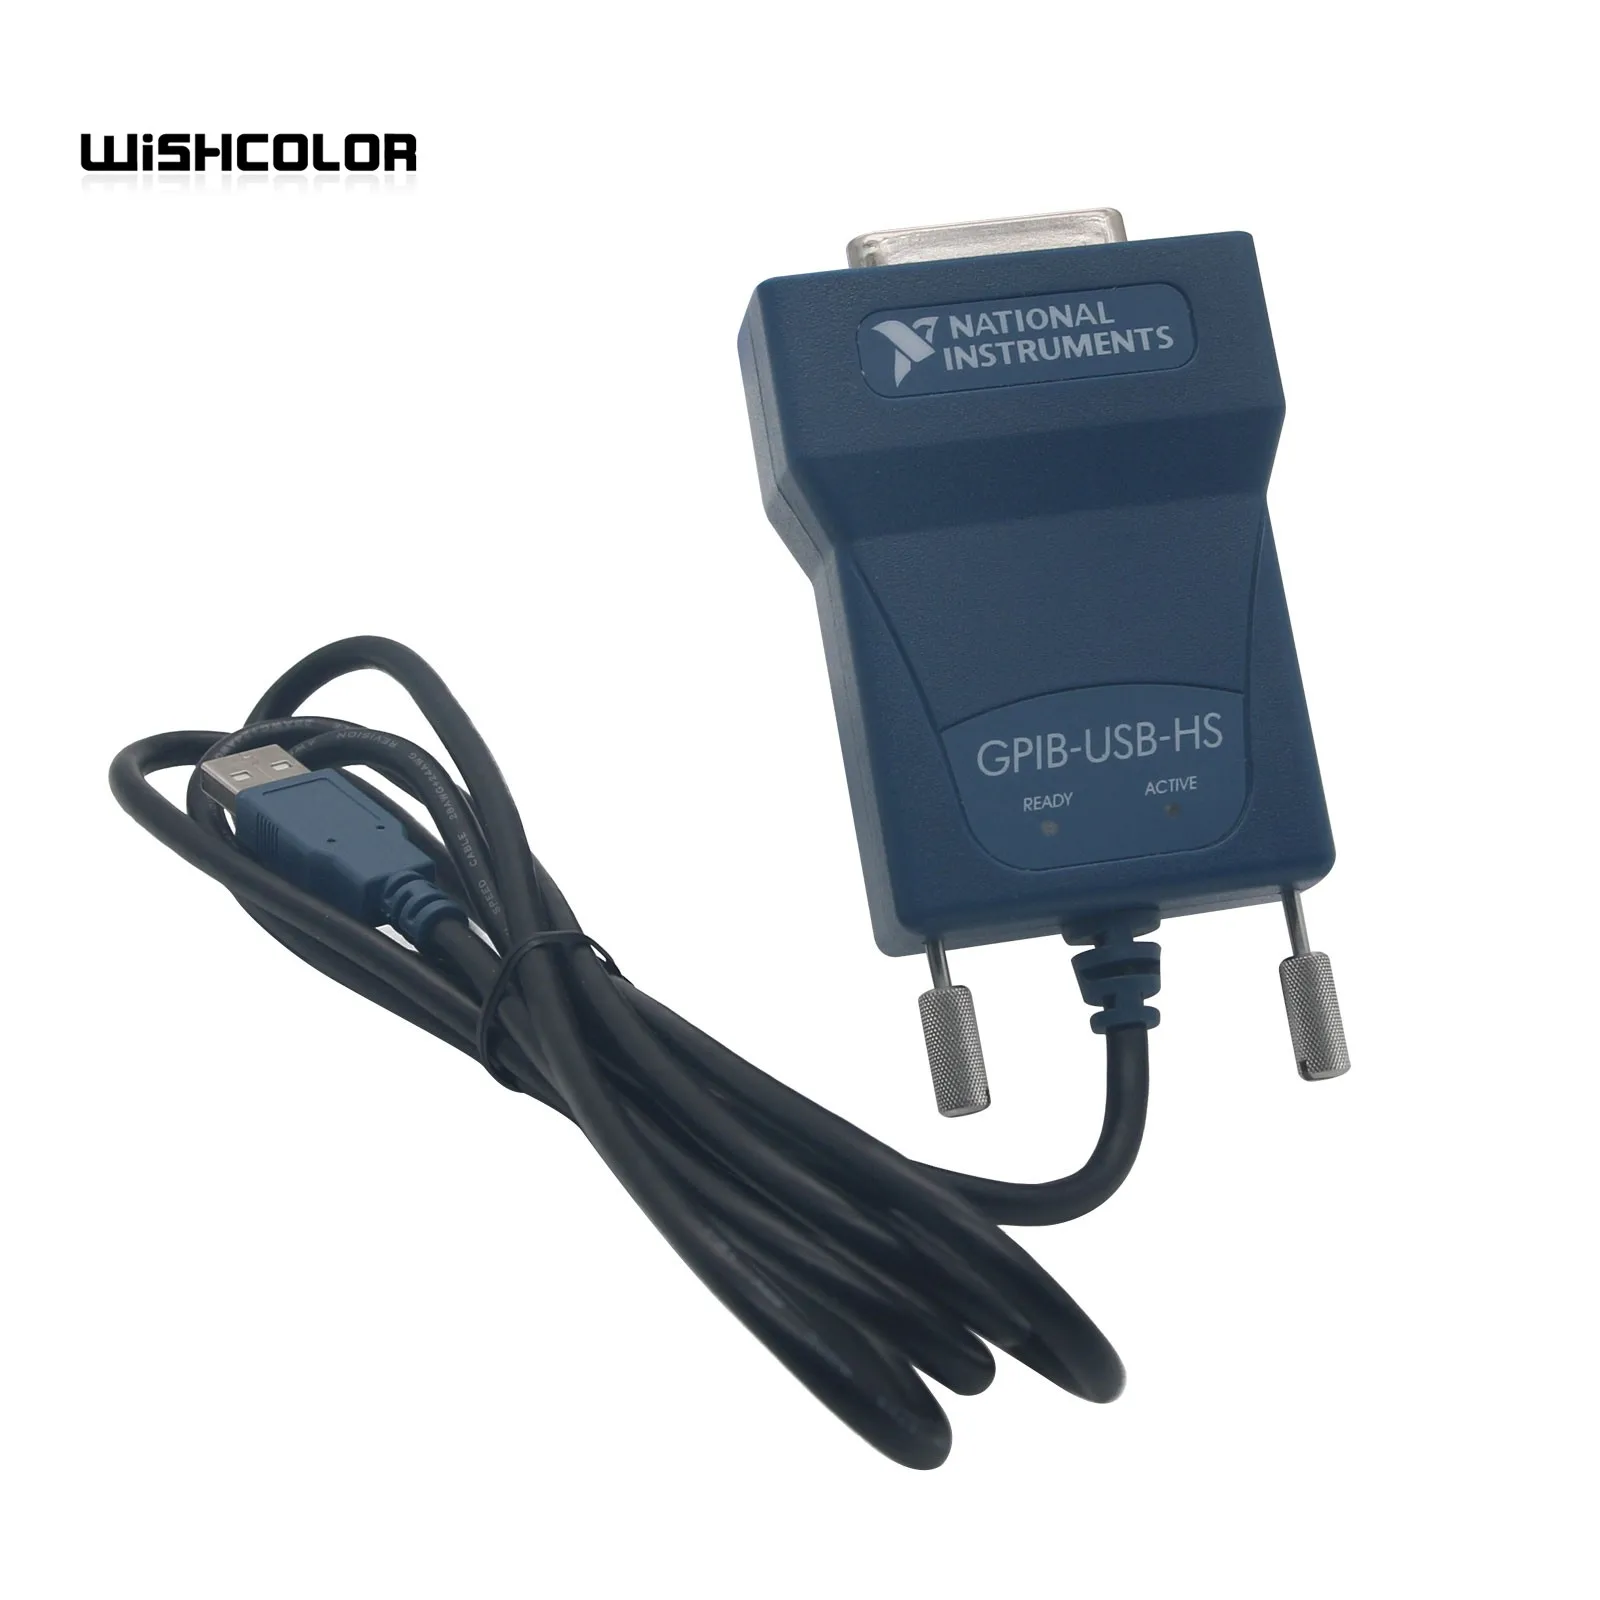 

Wishcolor Original GPIB-USB-HS GPIB Data Acquisition Card 778927-01 IEEE 488 For National Instruments NI